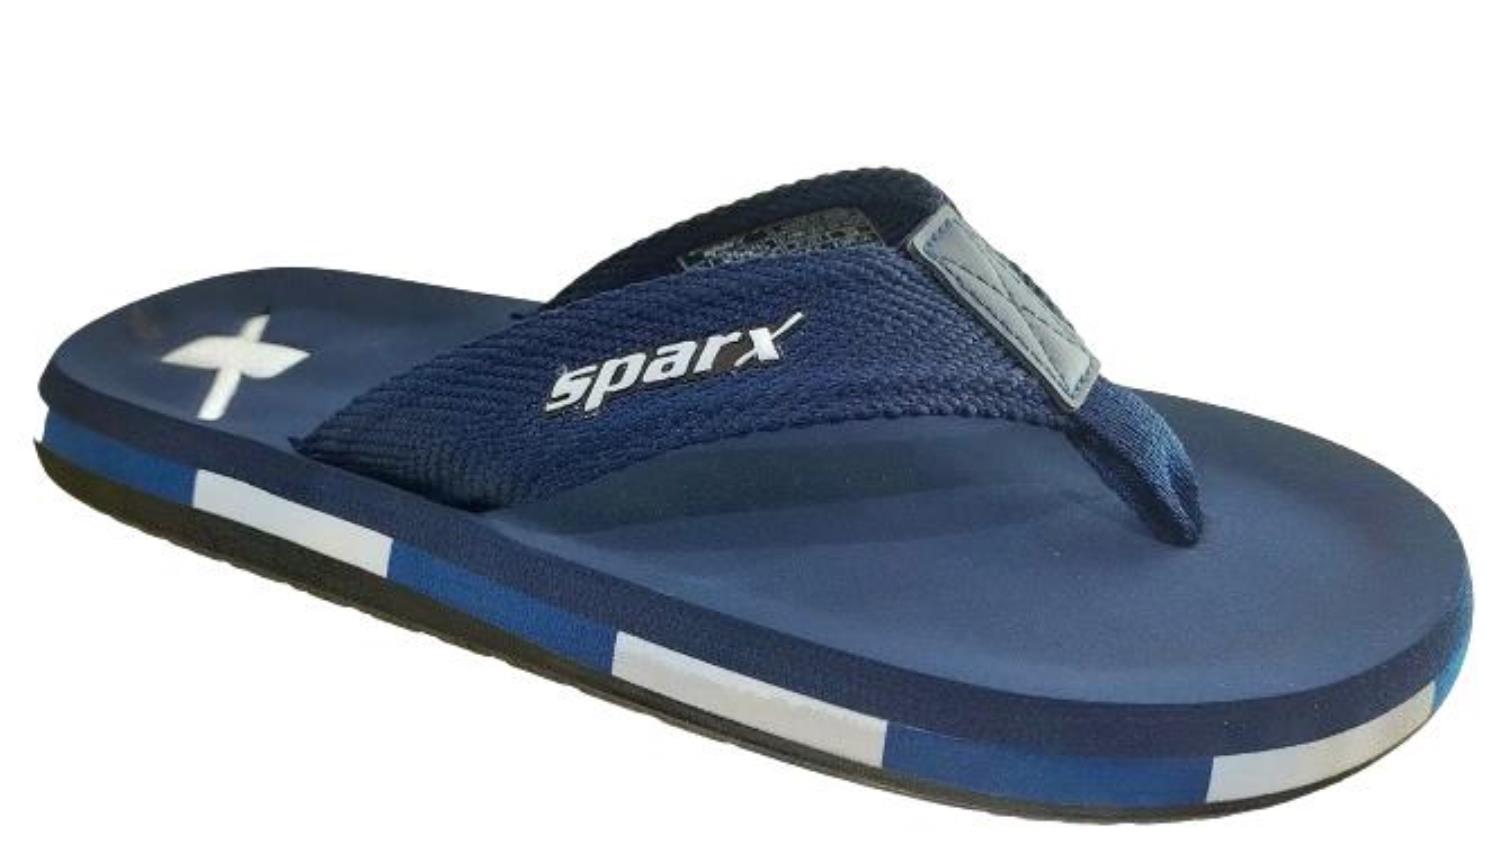 Sparx SANDALS 467 GENTS Sandals | Udaan - B2B Buying for Retailers